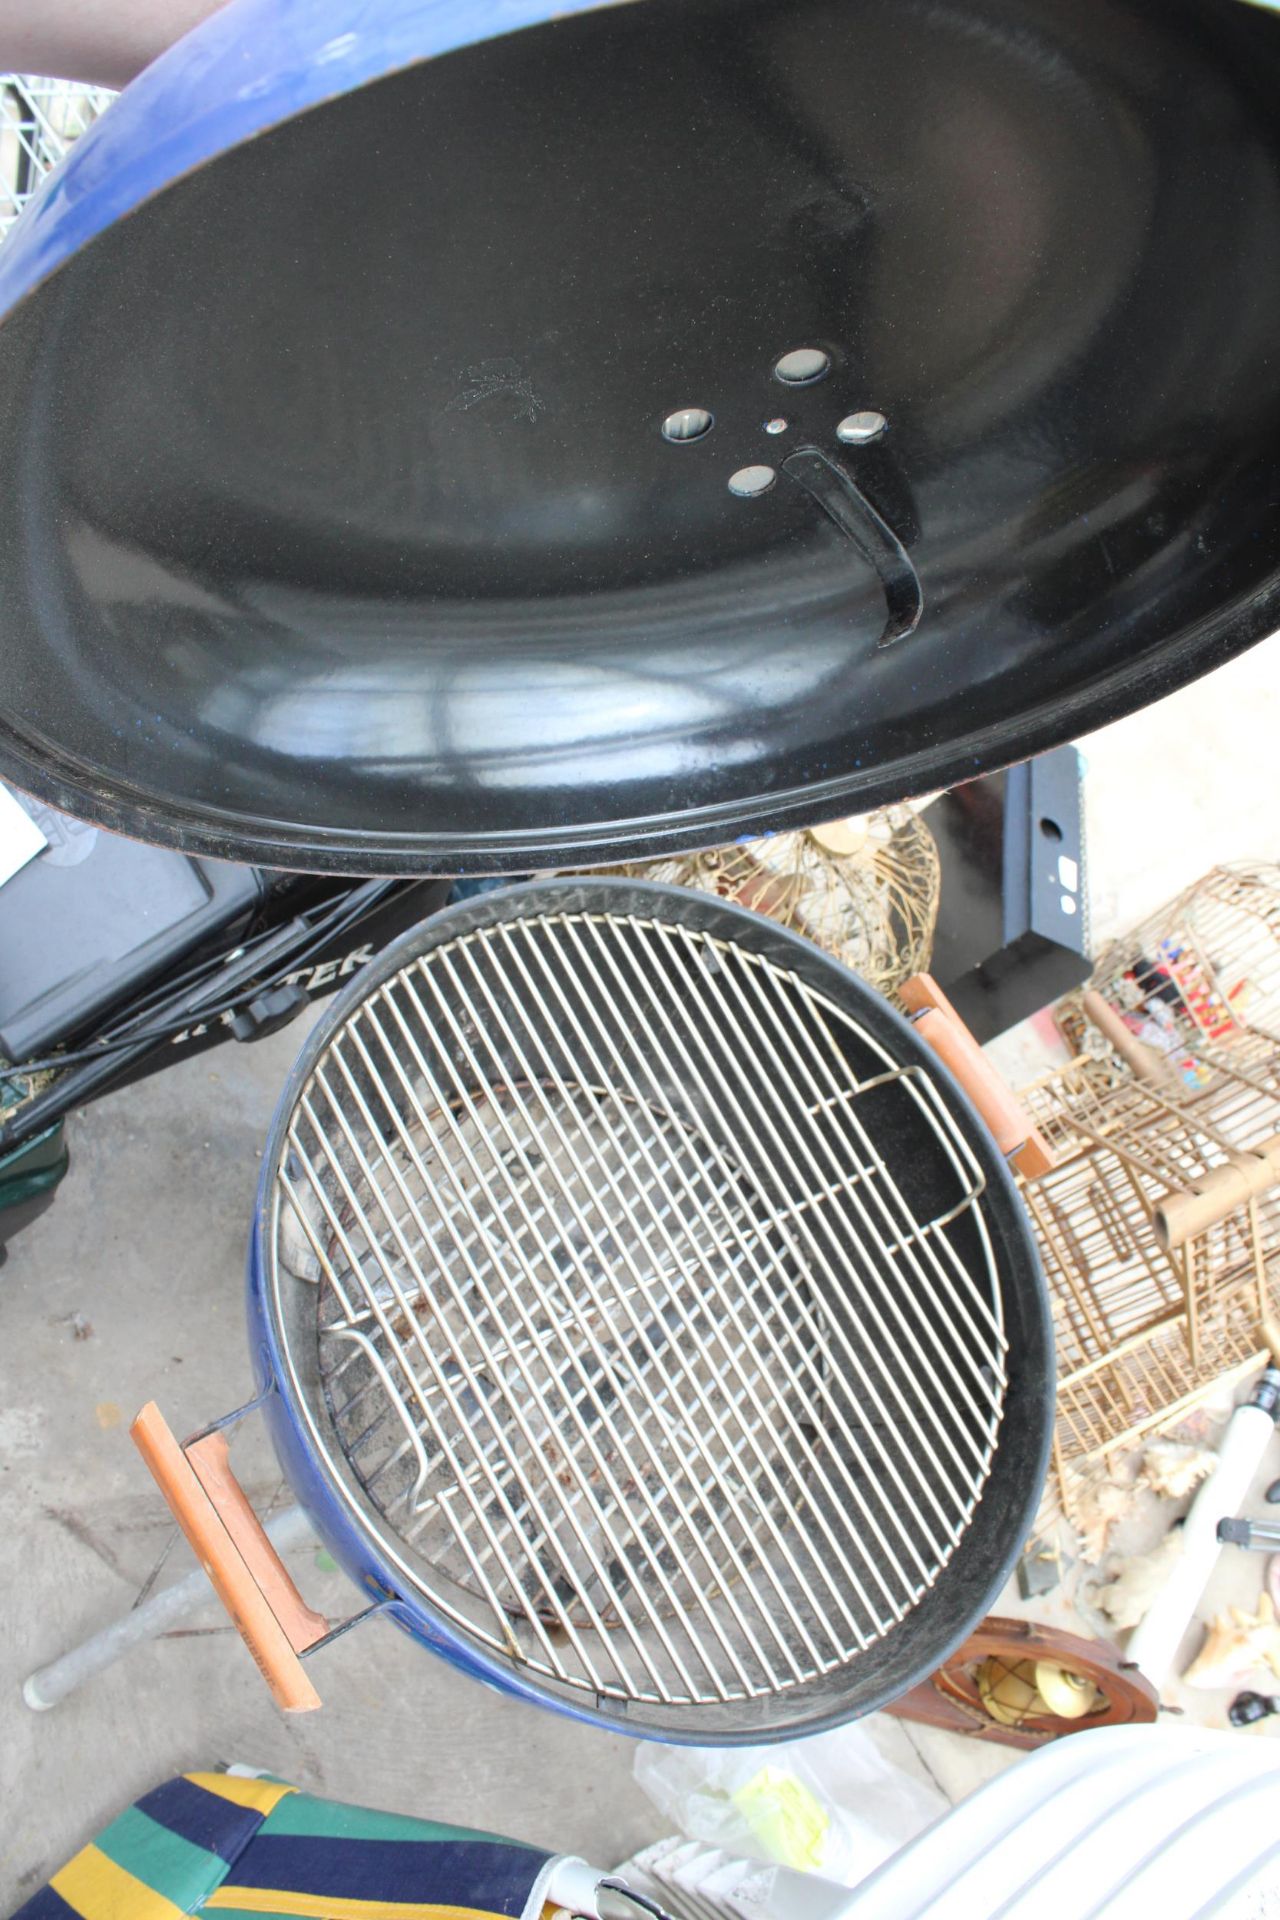 SIX PLASTIC STACKING CHAIRS, A FOLDING CHAIR AND A BBQ - Image 3 of 3